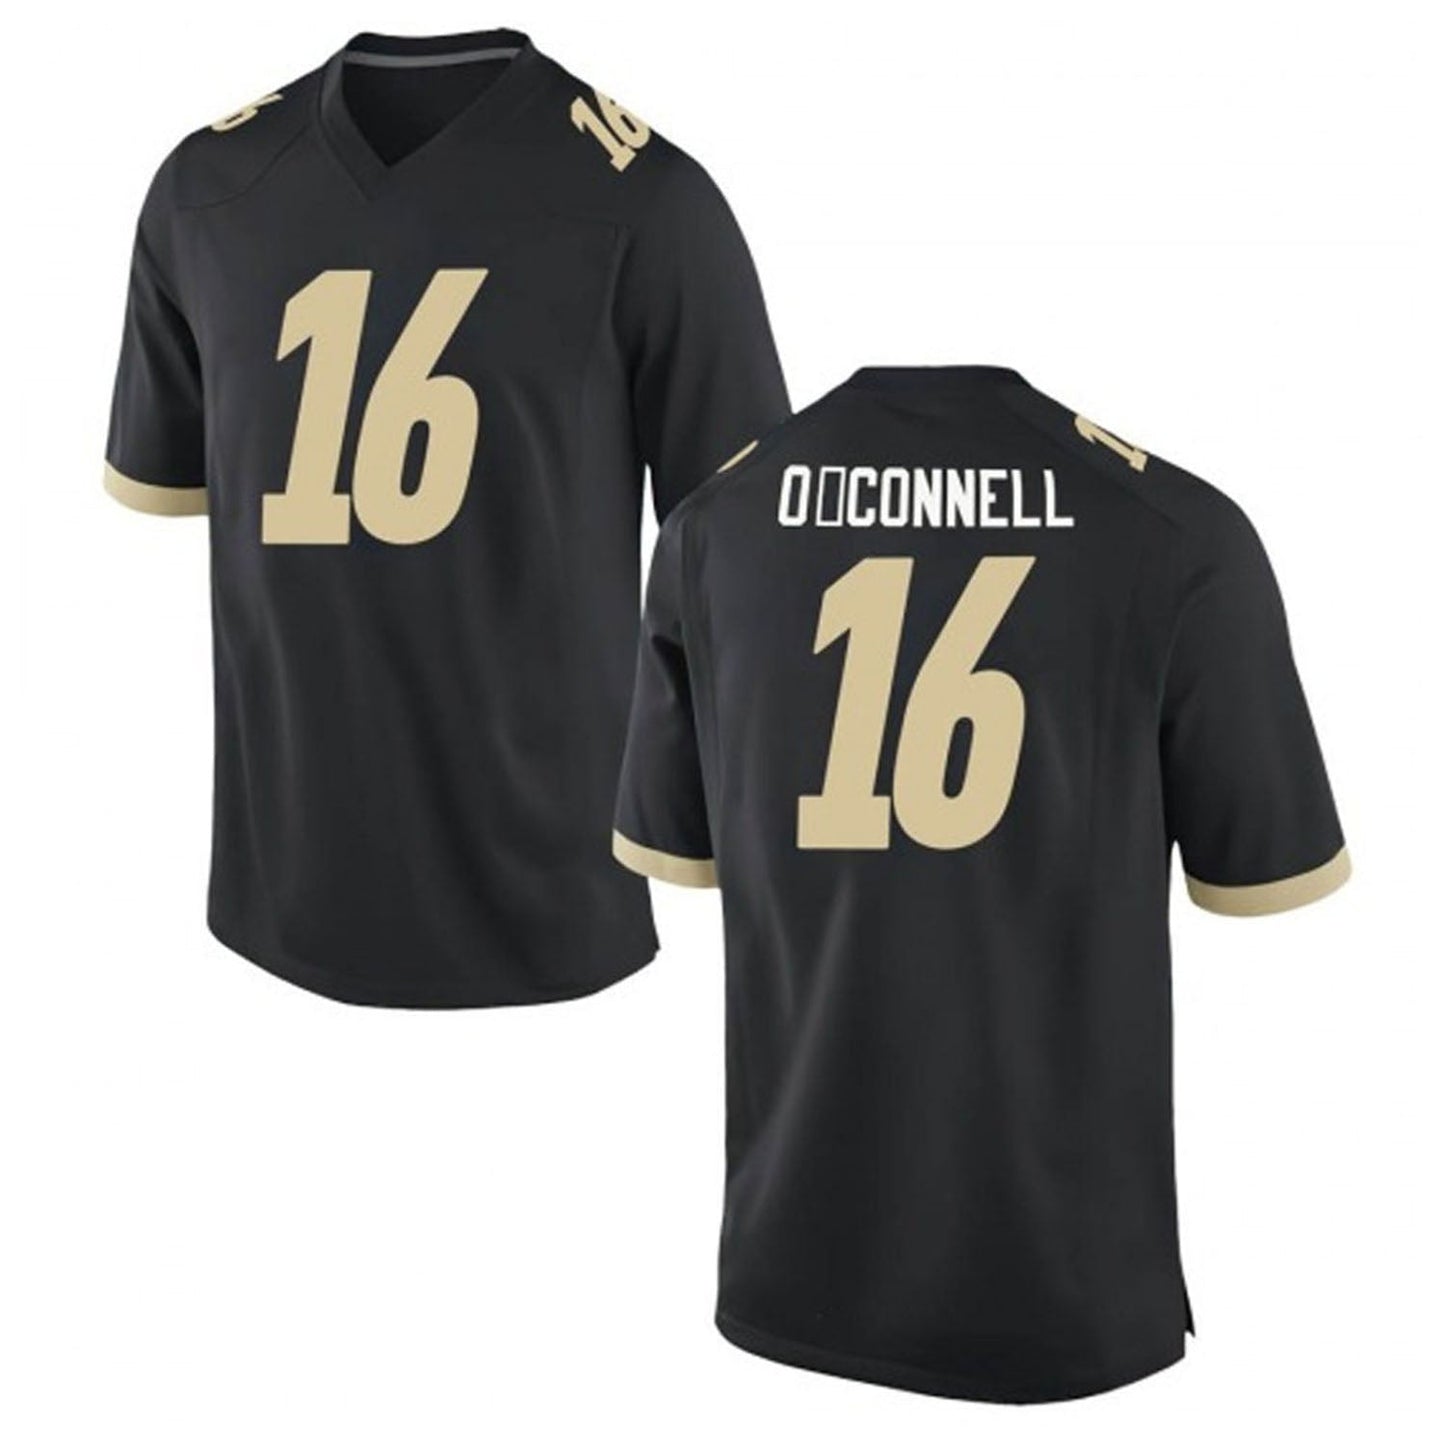 NCAAF Aidan O'Connell Purdue 16 Jersey